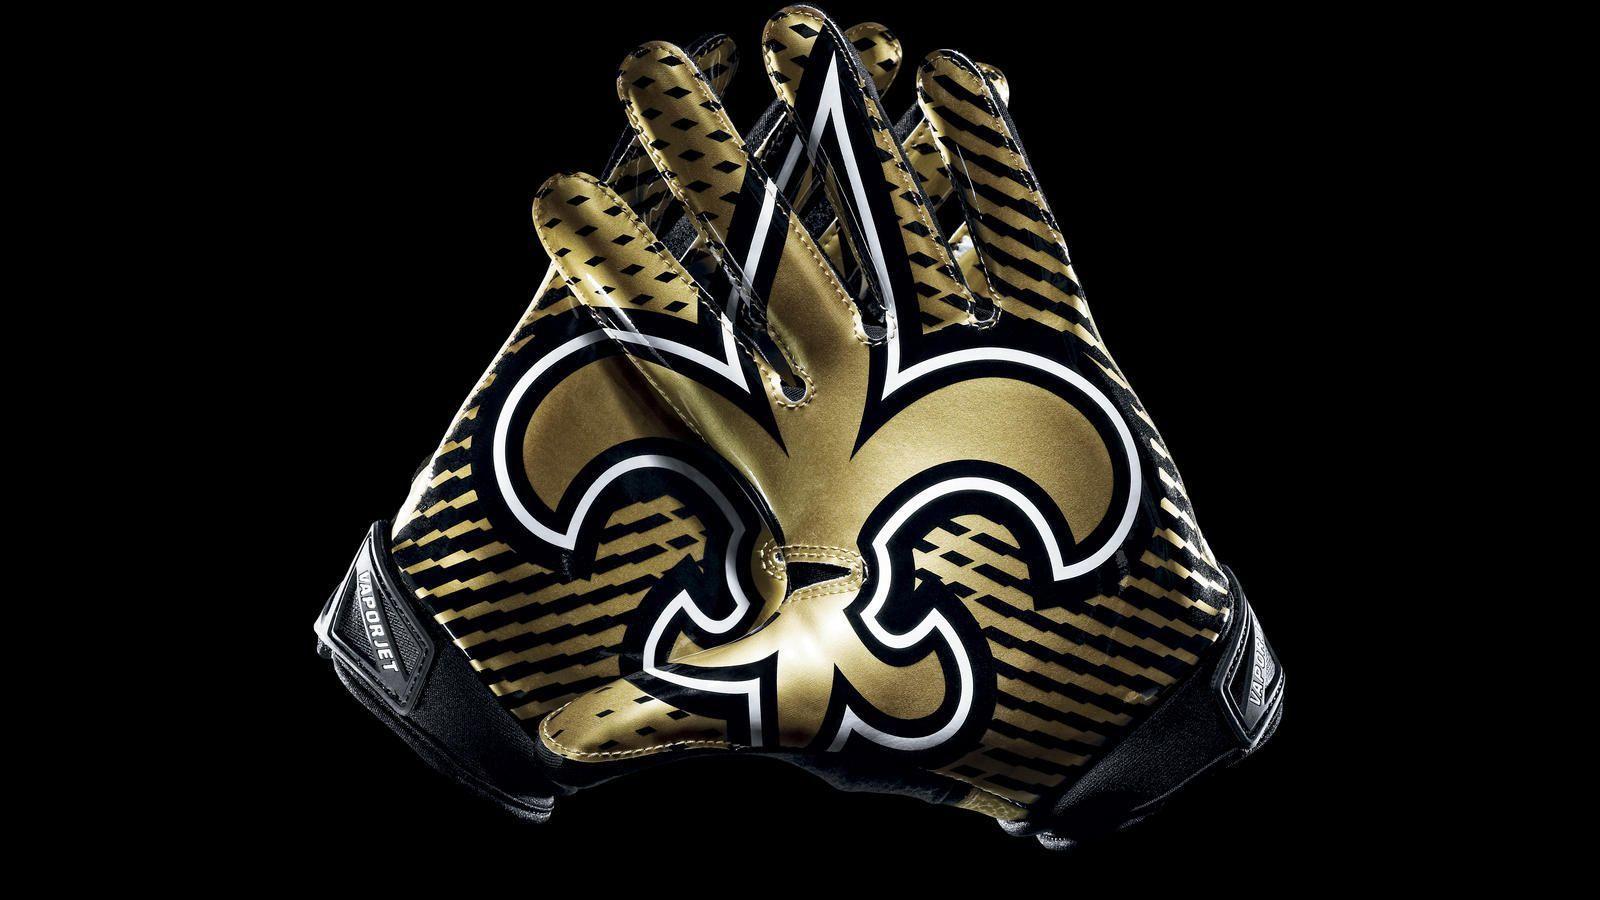 New Orleans Saints Team Page at NFLcom